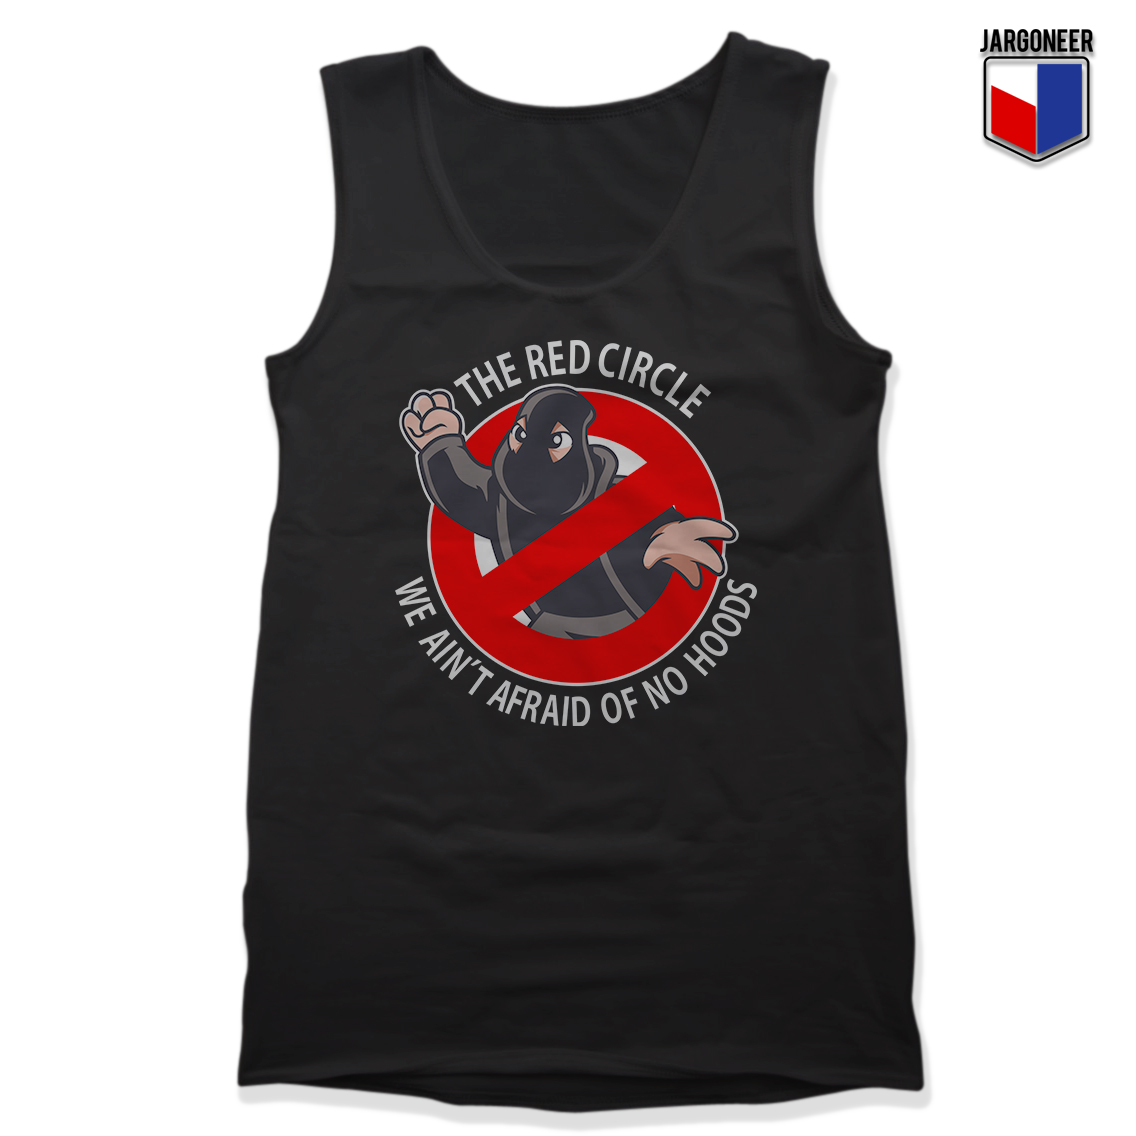 The Red Circle Not Afraid Of No Hoods Black Tank - Shop Unique Graphic Cool Shirt Designs